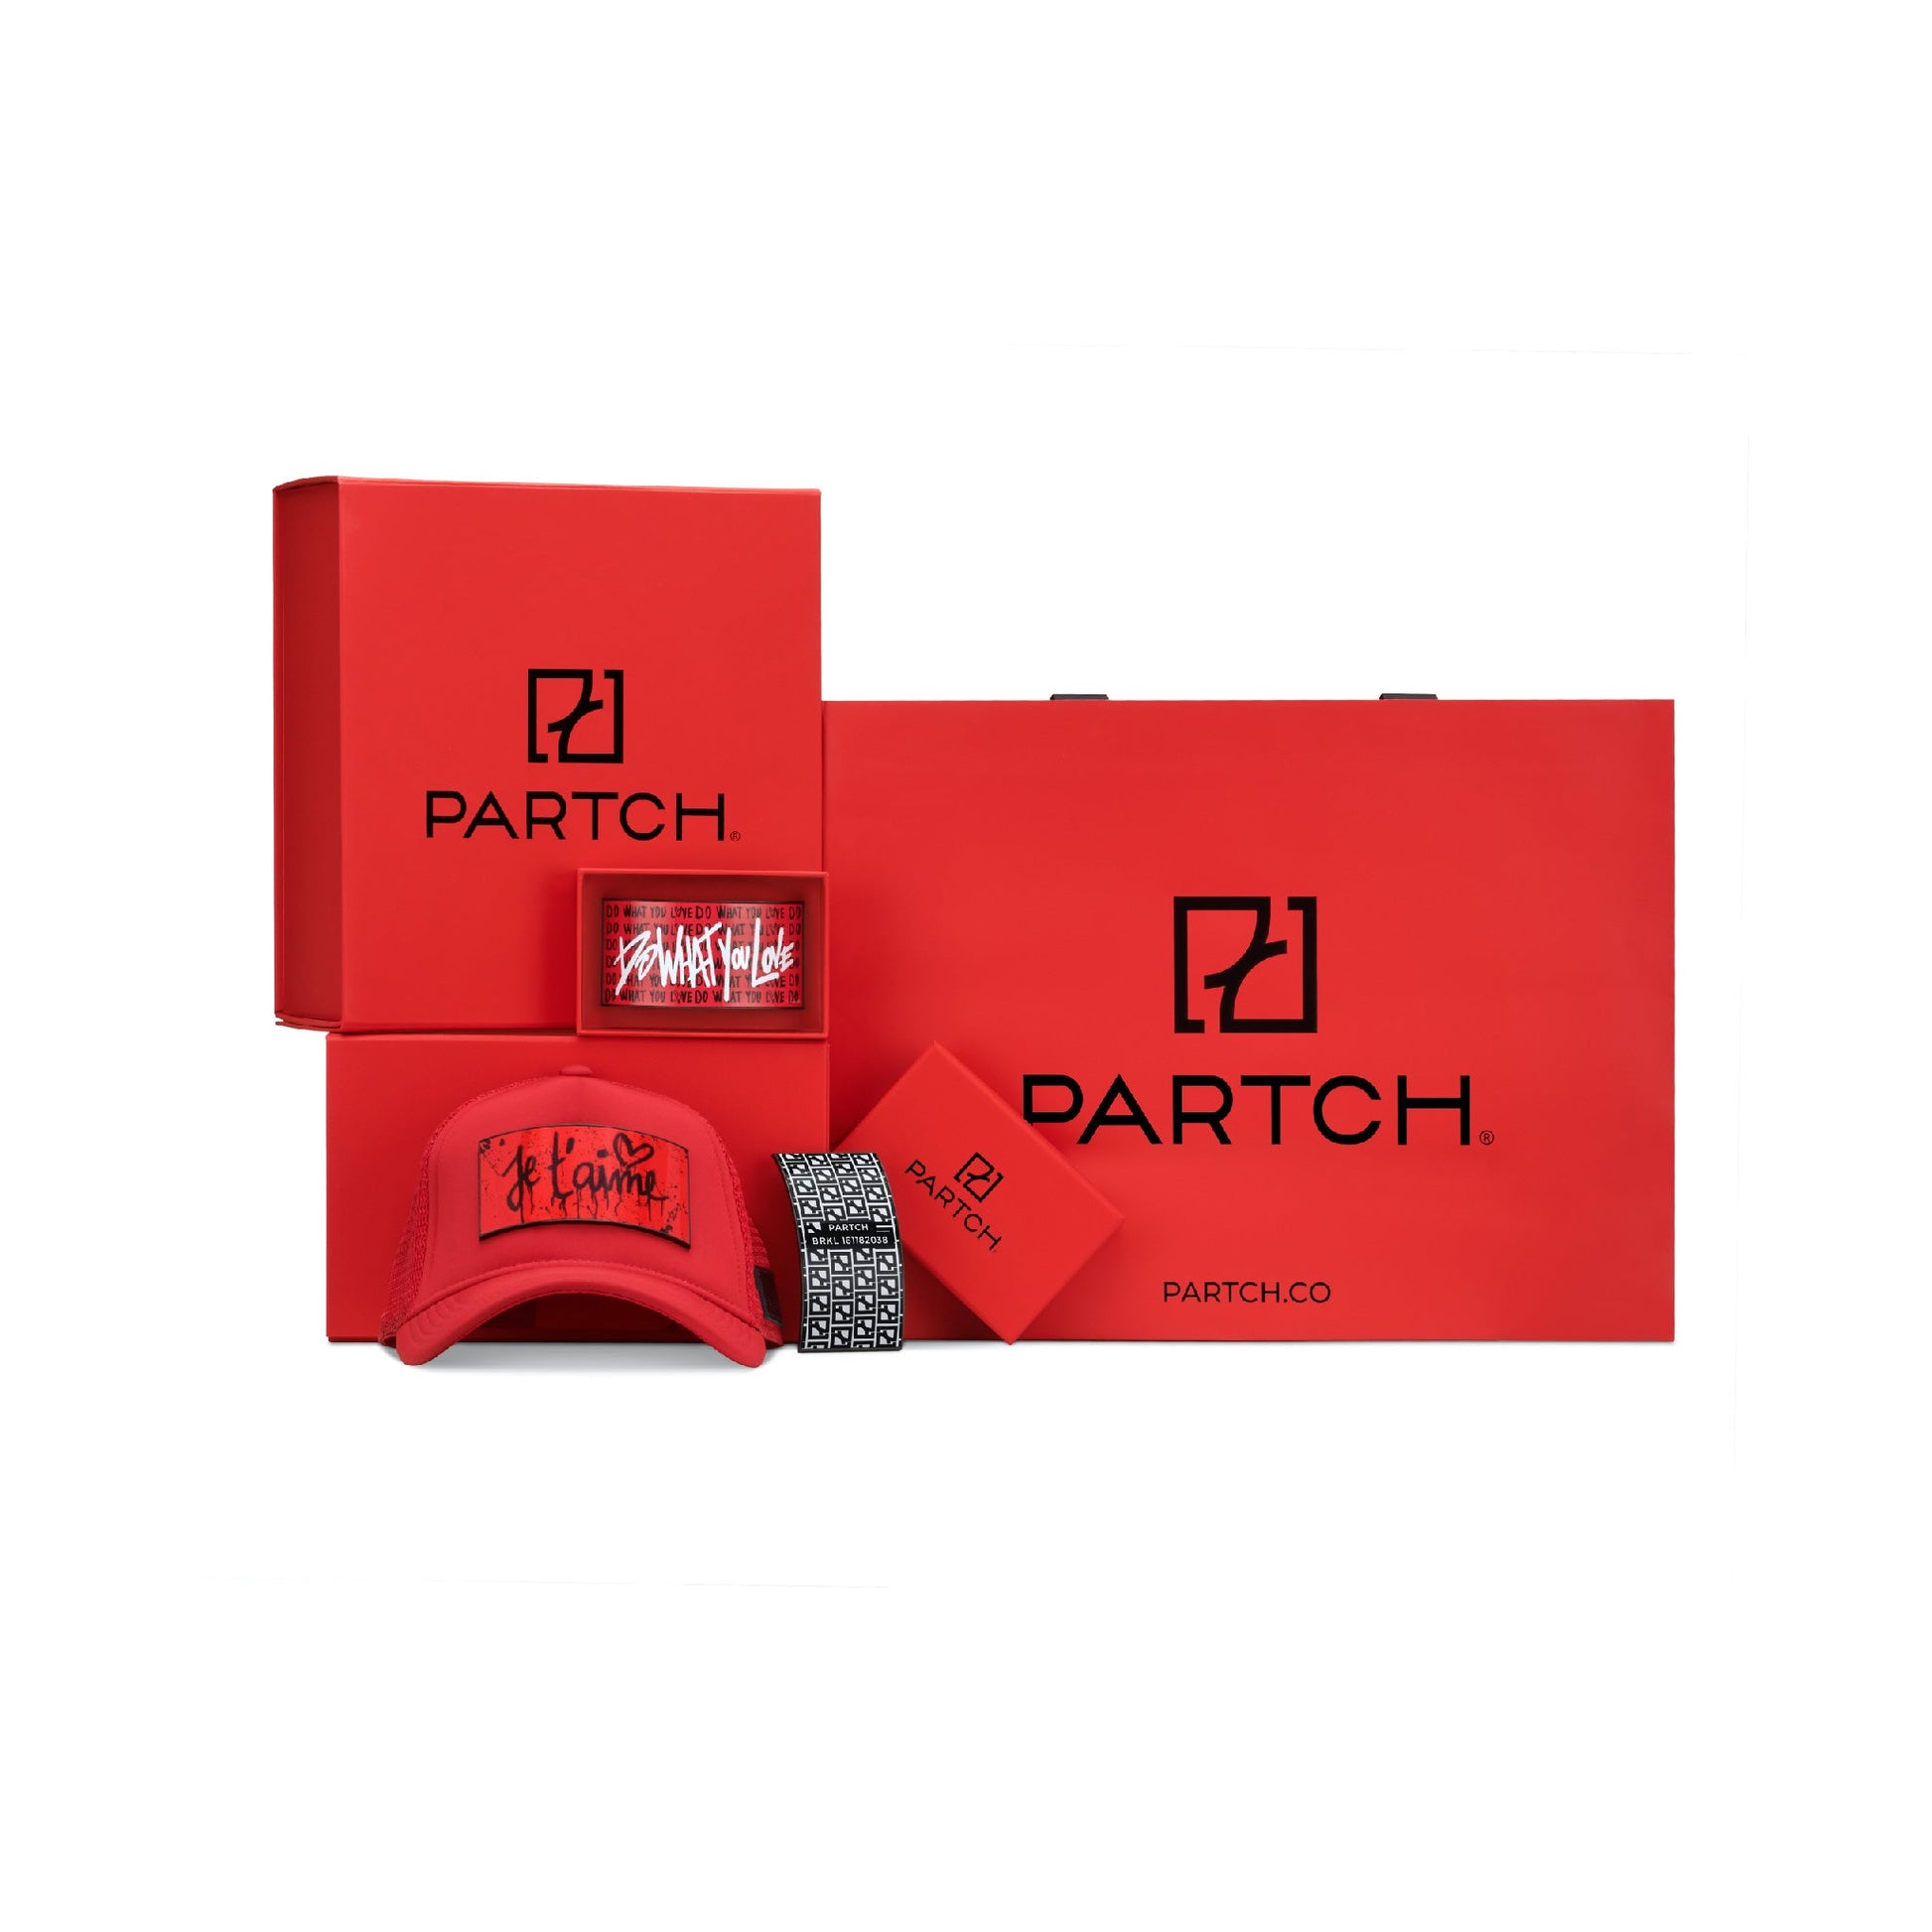 PARTCH Luxury Packaging. Shopping bag, box, hats, caps, Partch-clip, red